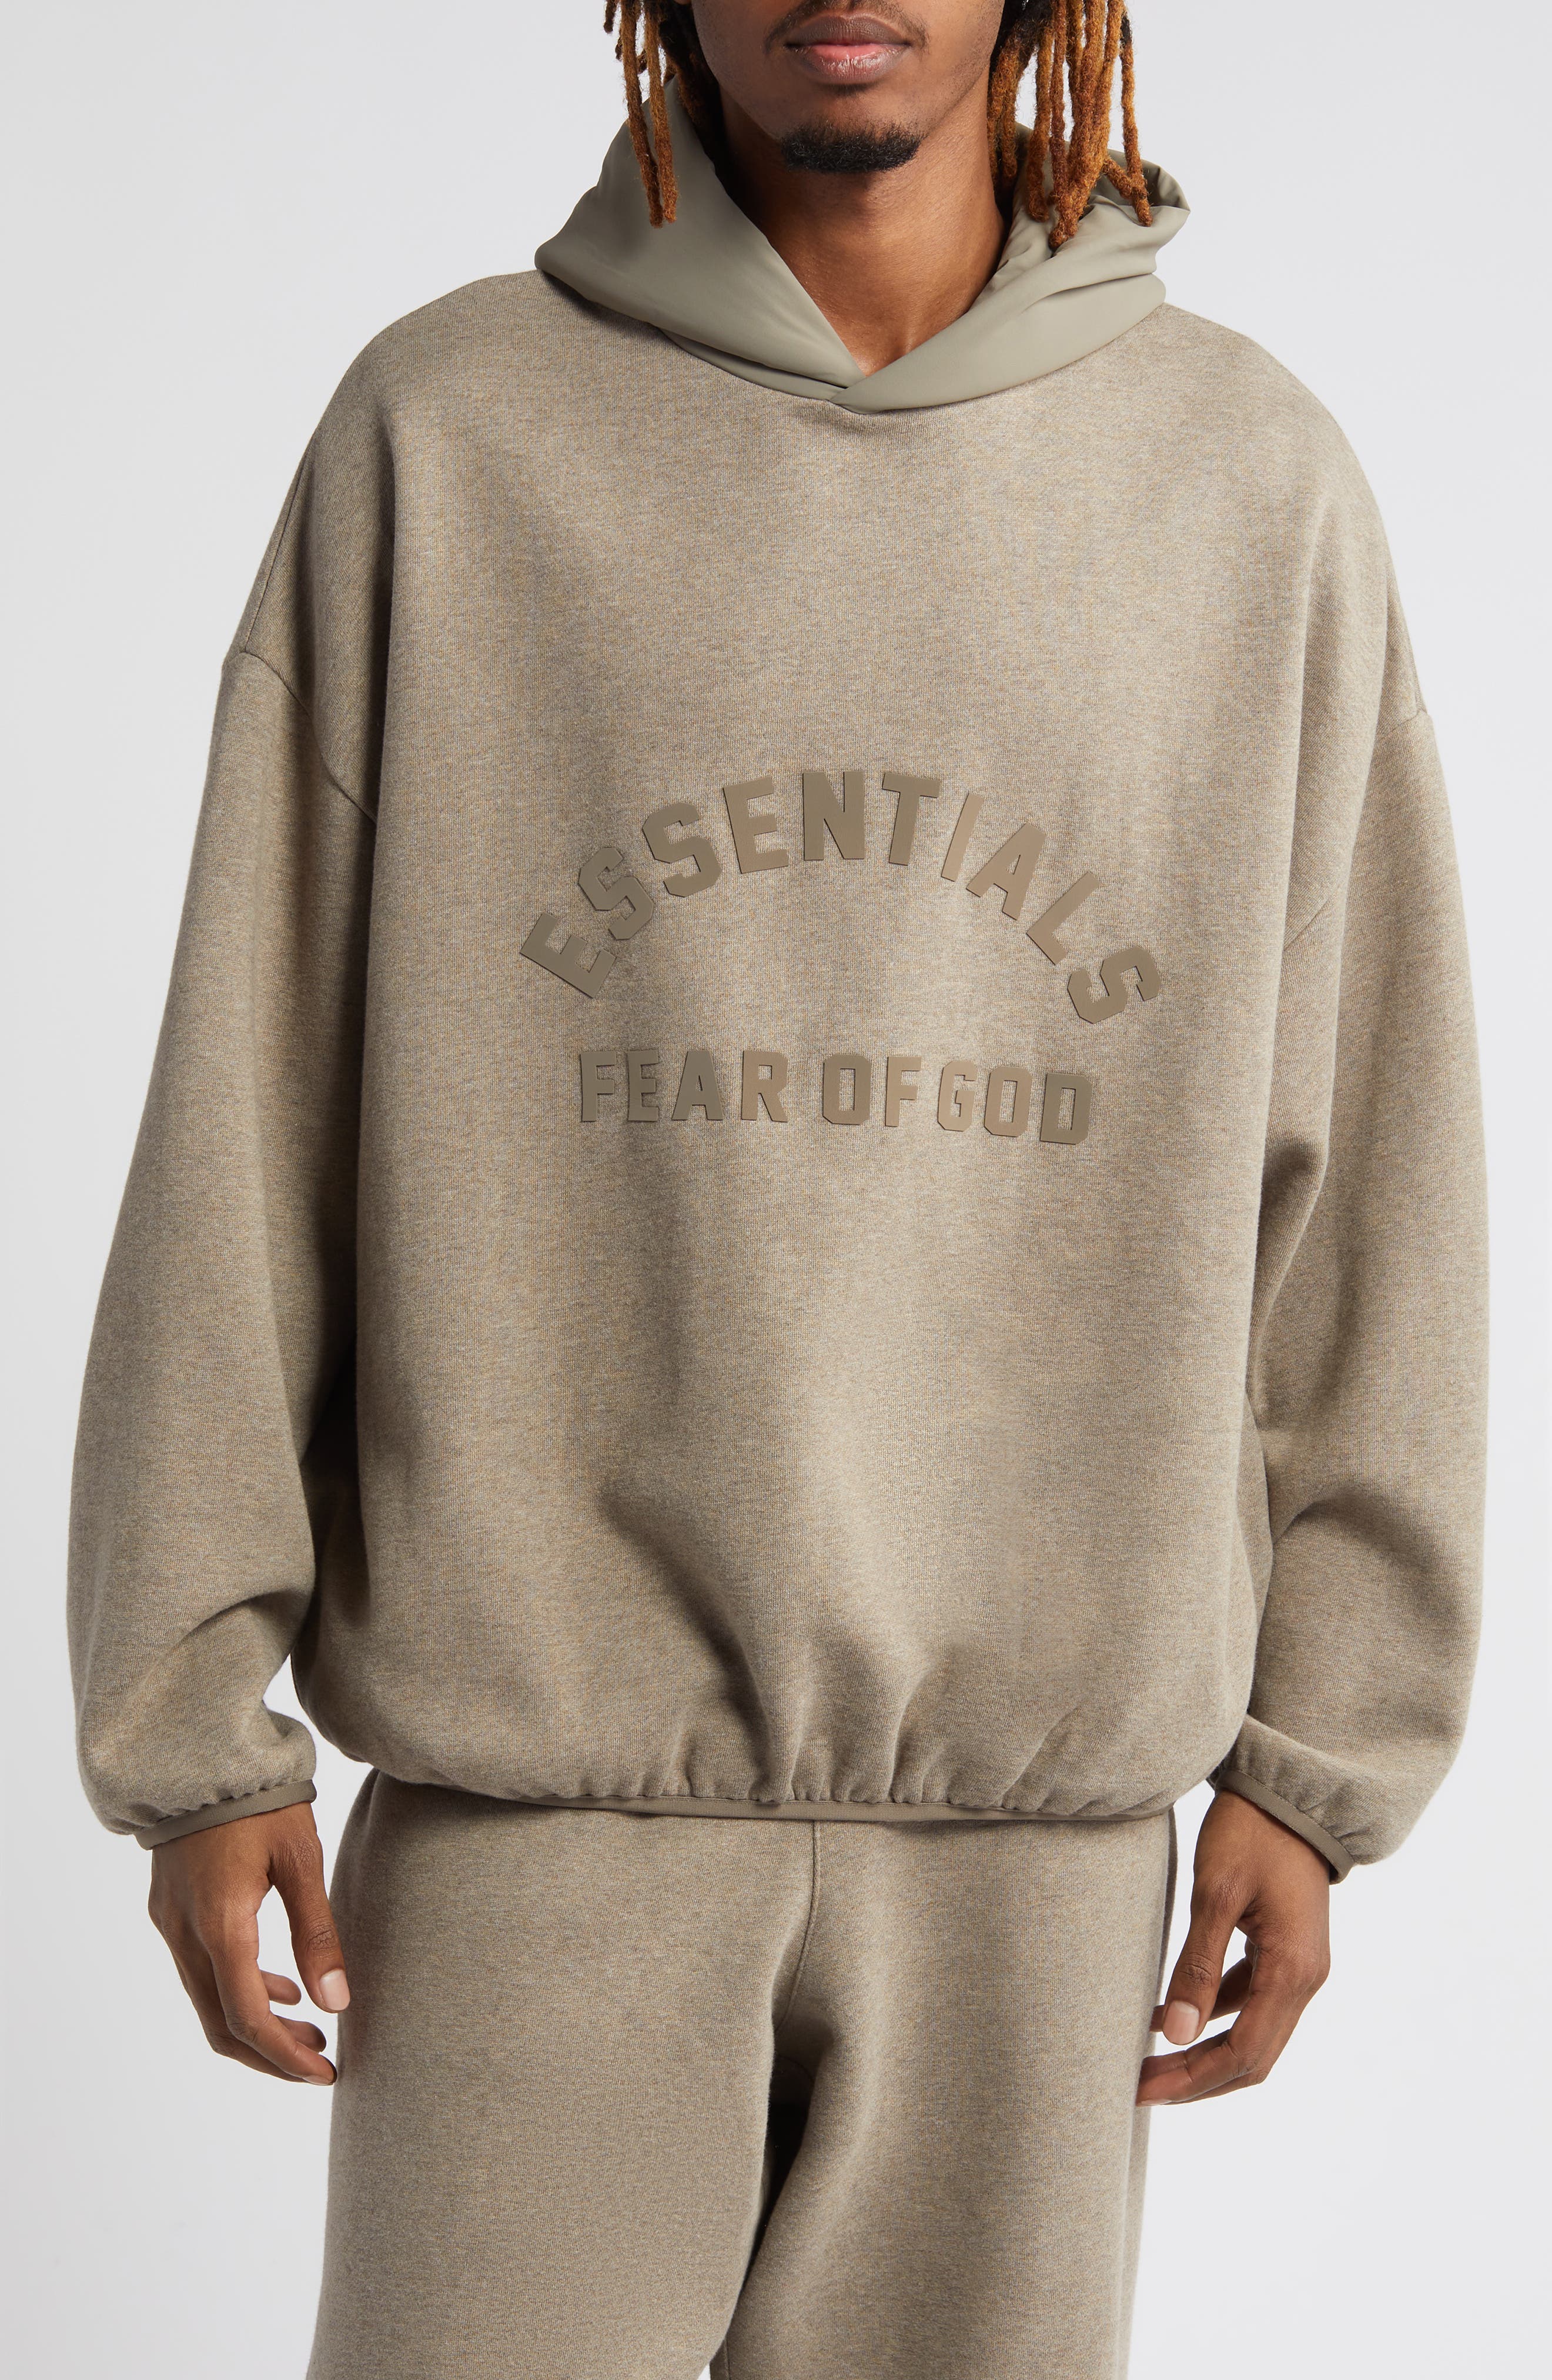 Men's Fear of God Essentials View All: Clothing